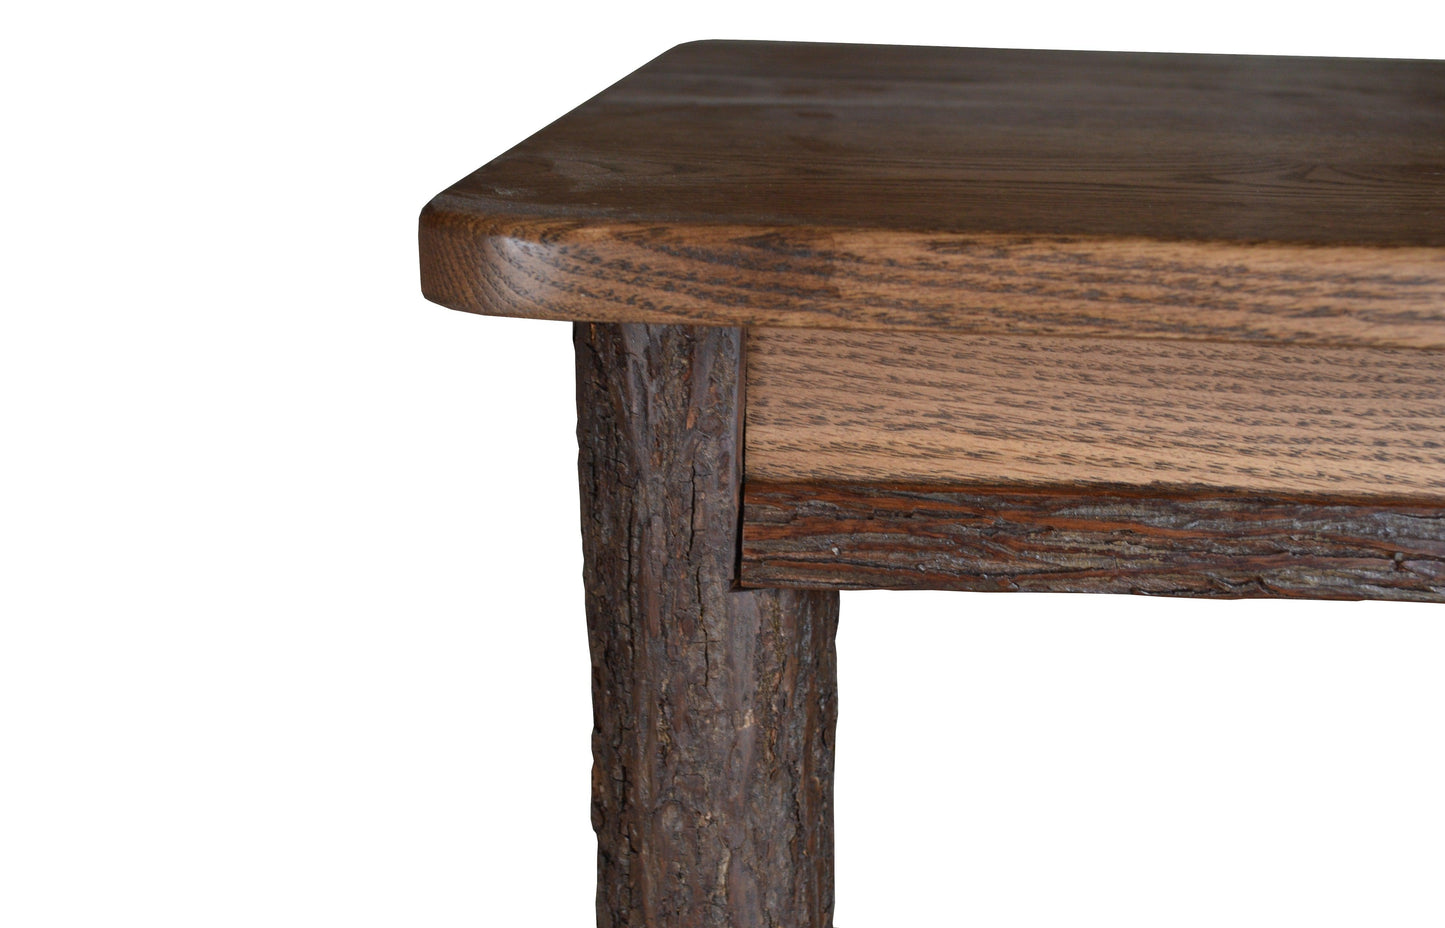 A&L Furniture Co. Hickory Solid Wood End Table with Shelf - LEAD TIME TO SHIP 4 WEEKS OR LESS